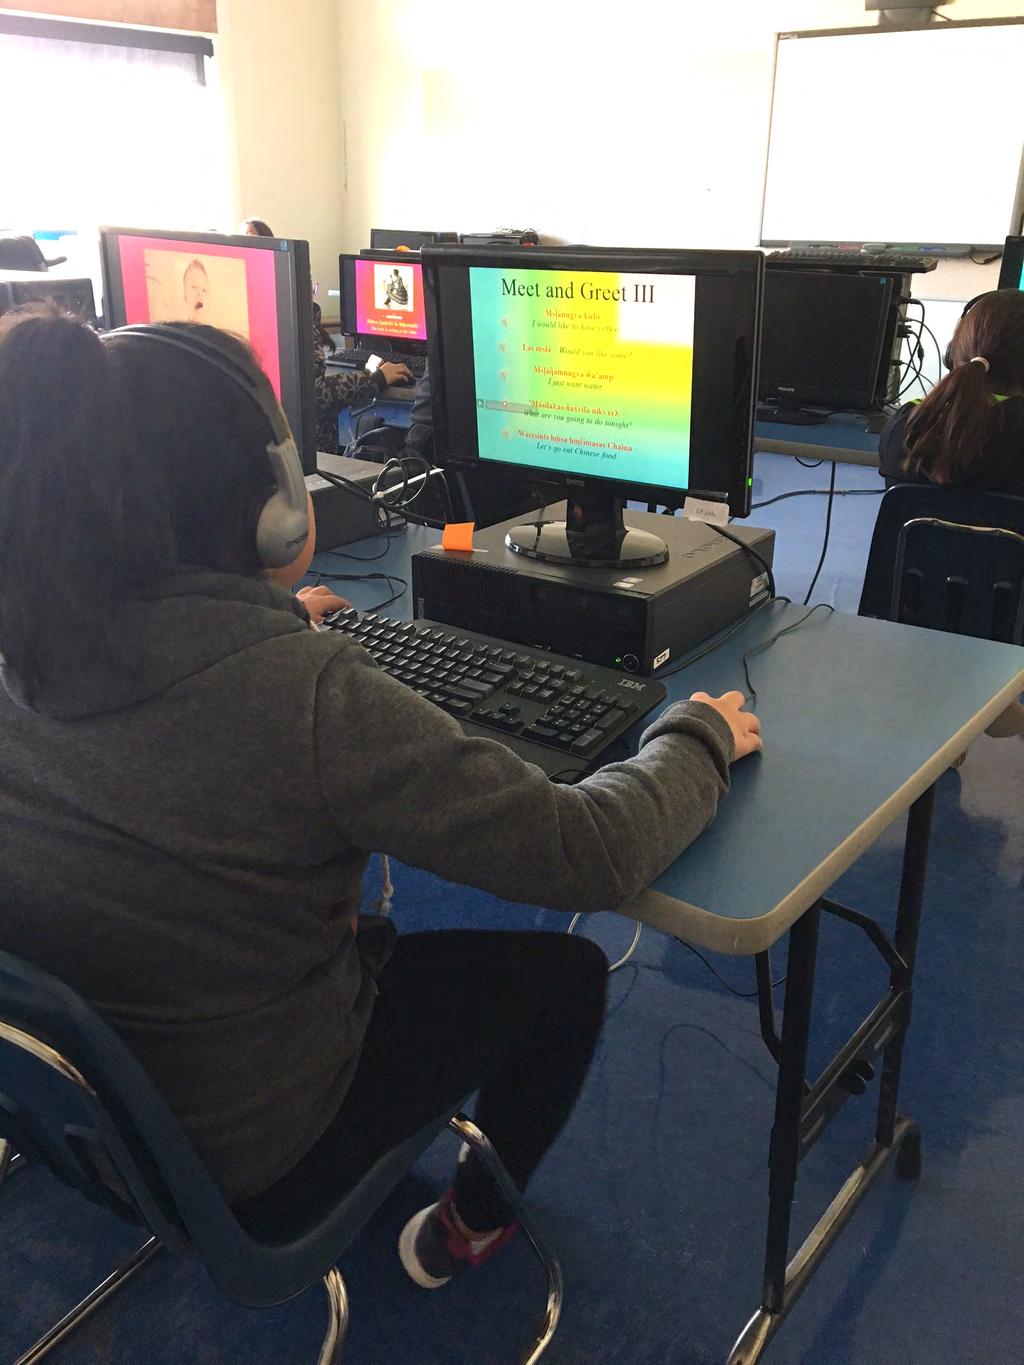 Once a week, grades 2-9 go to the BBCS computer lab during language class and work through PowerPoint presentations with images and embedded recordings, and repeat each word or phrase after hearing